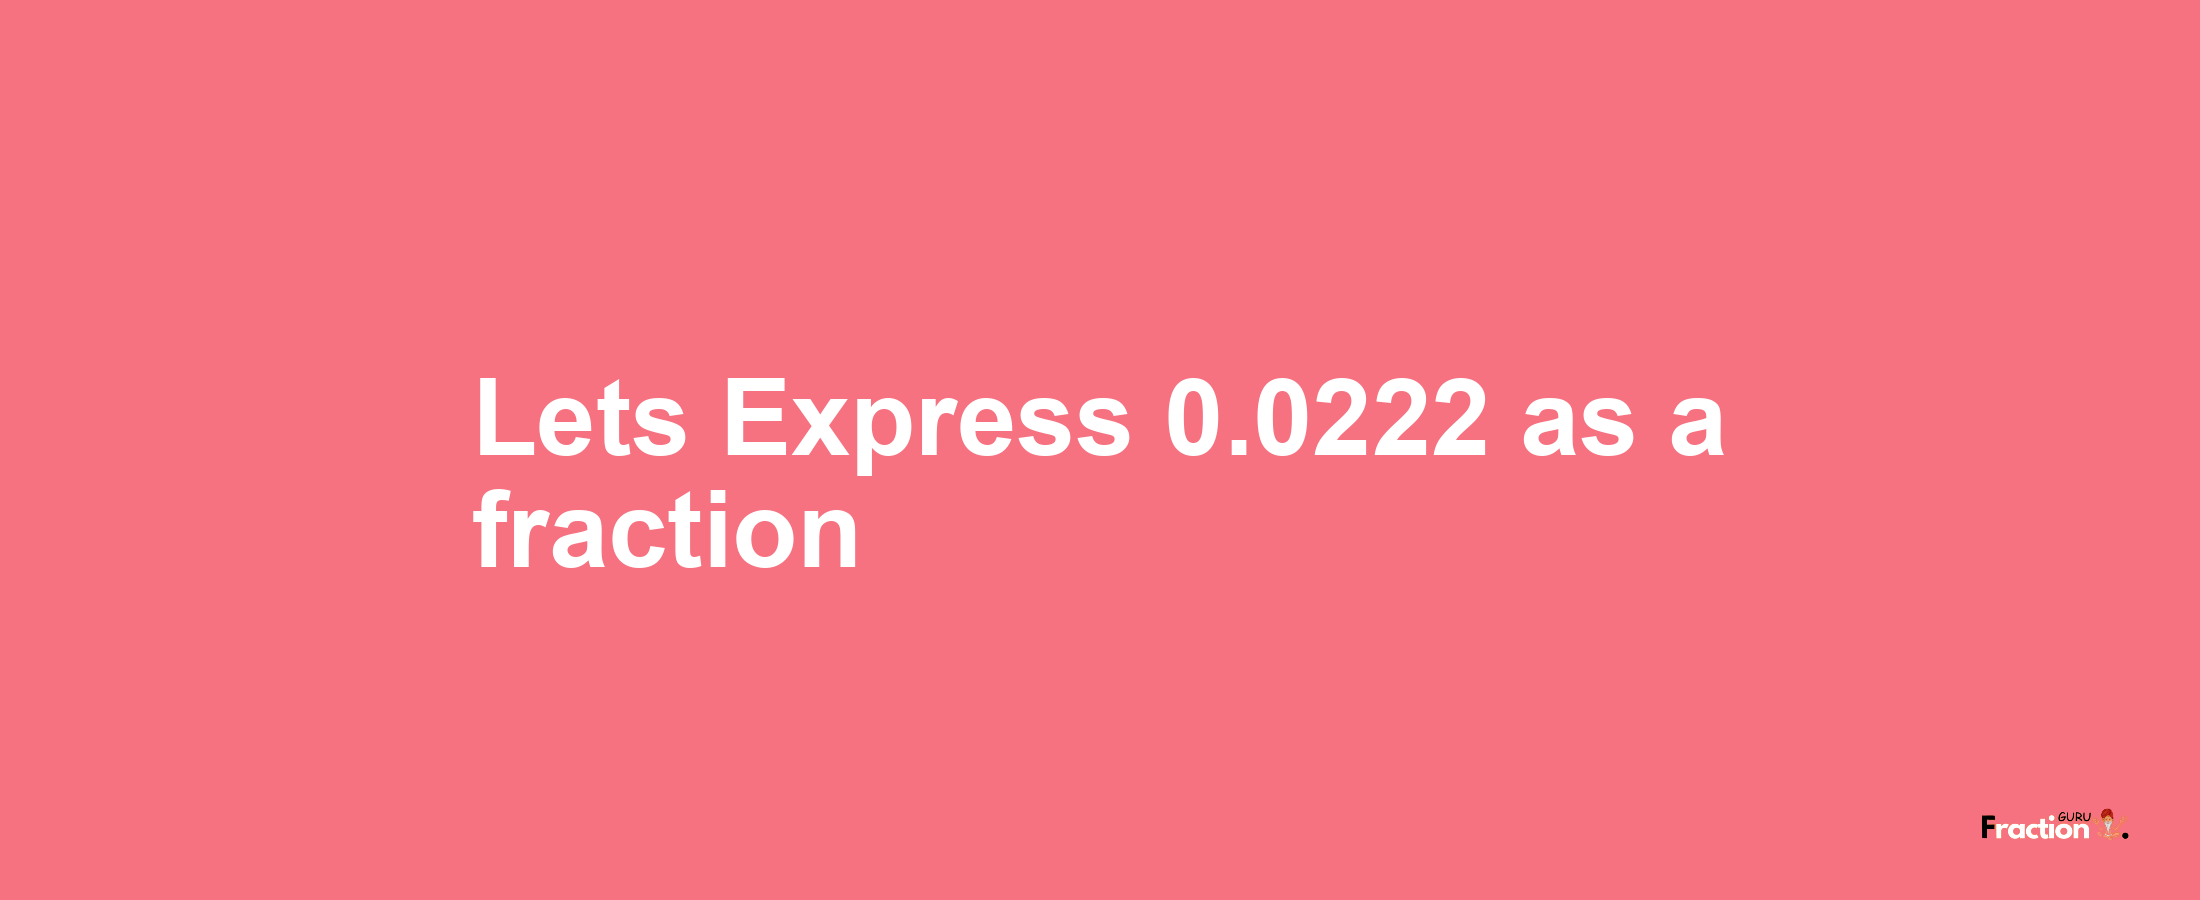 Lets Express 0.0222 as afraction